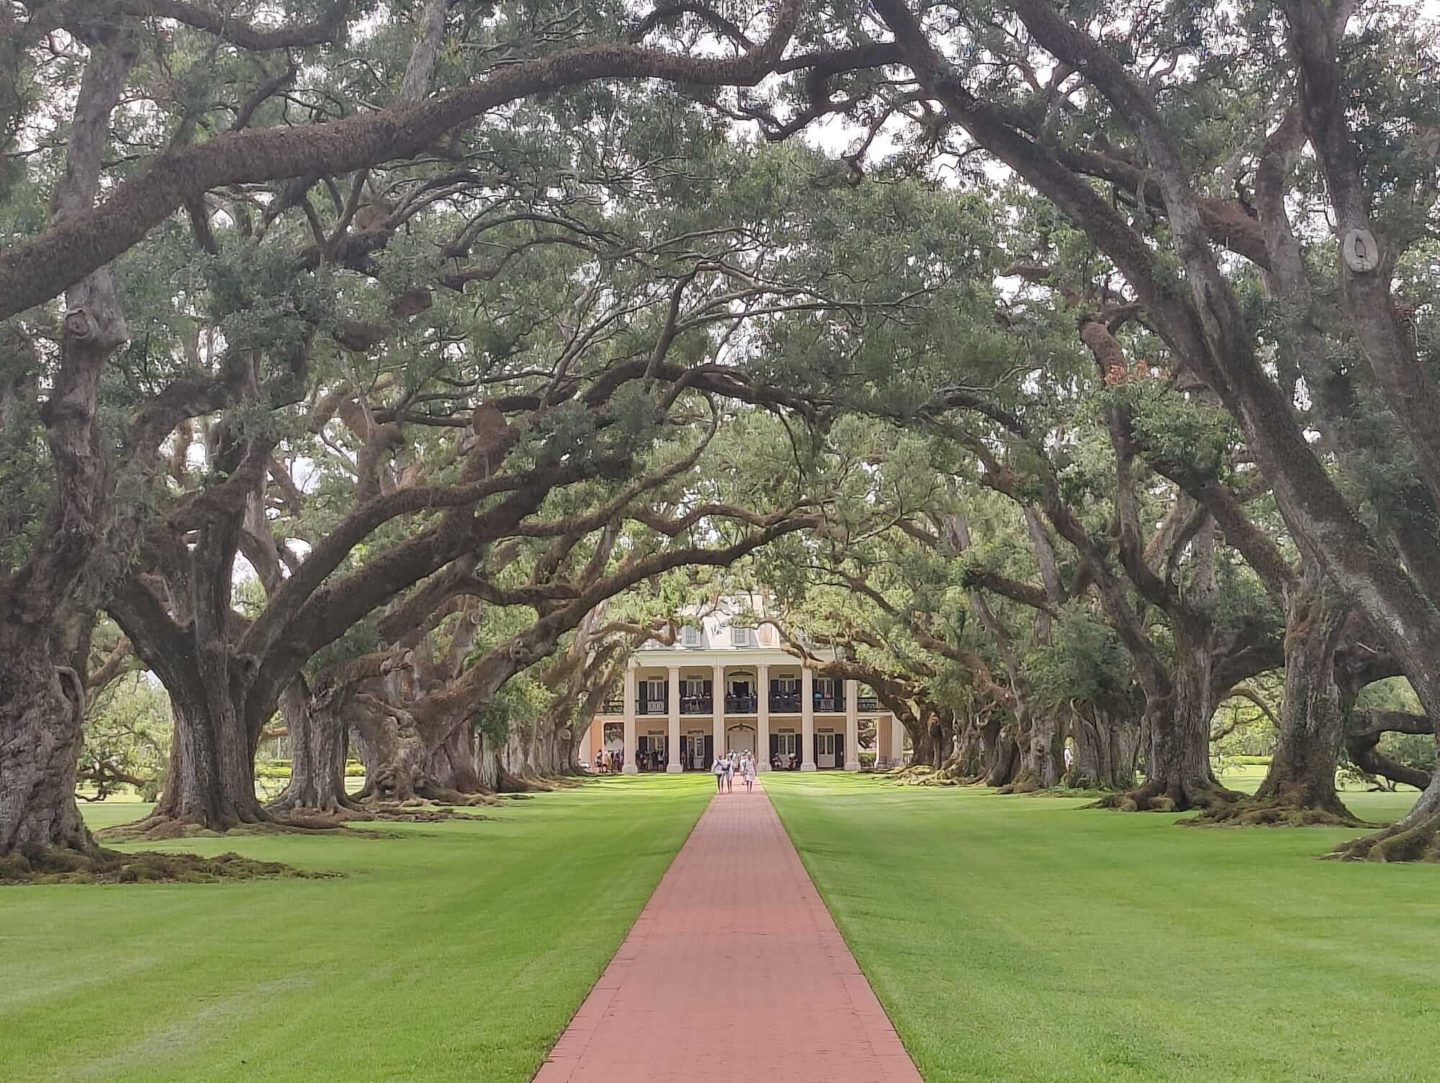 Large trees on either side of a path leading up to a cream plantation house.